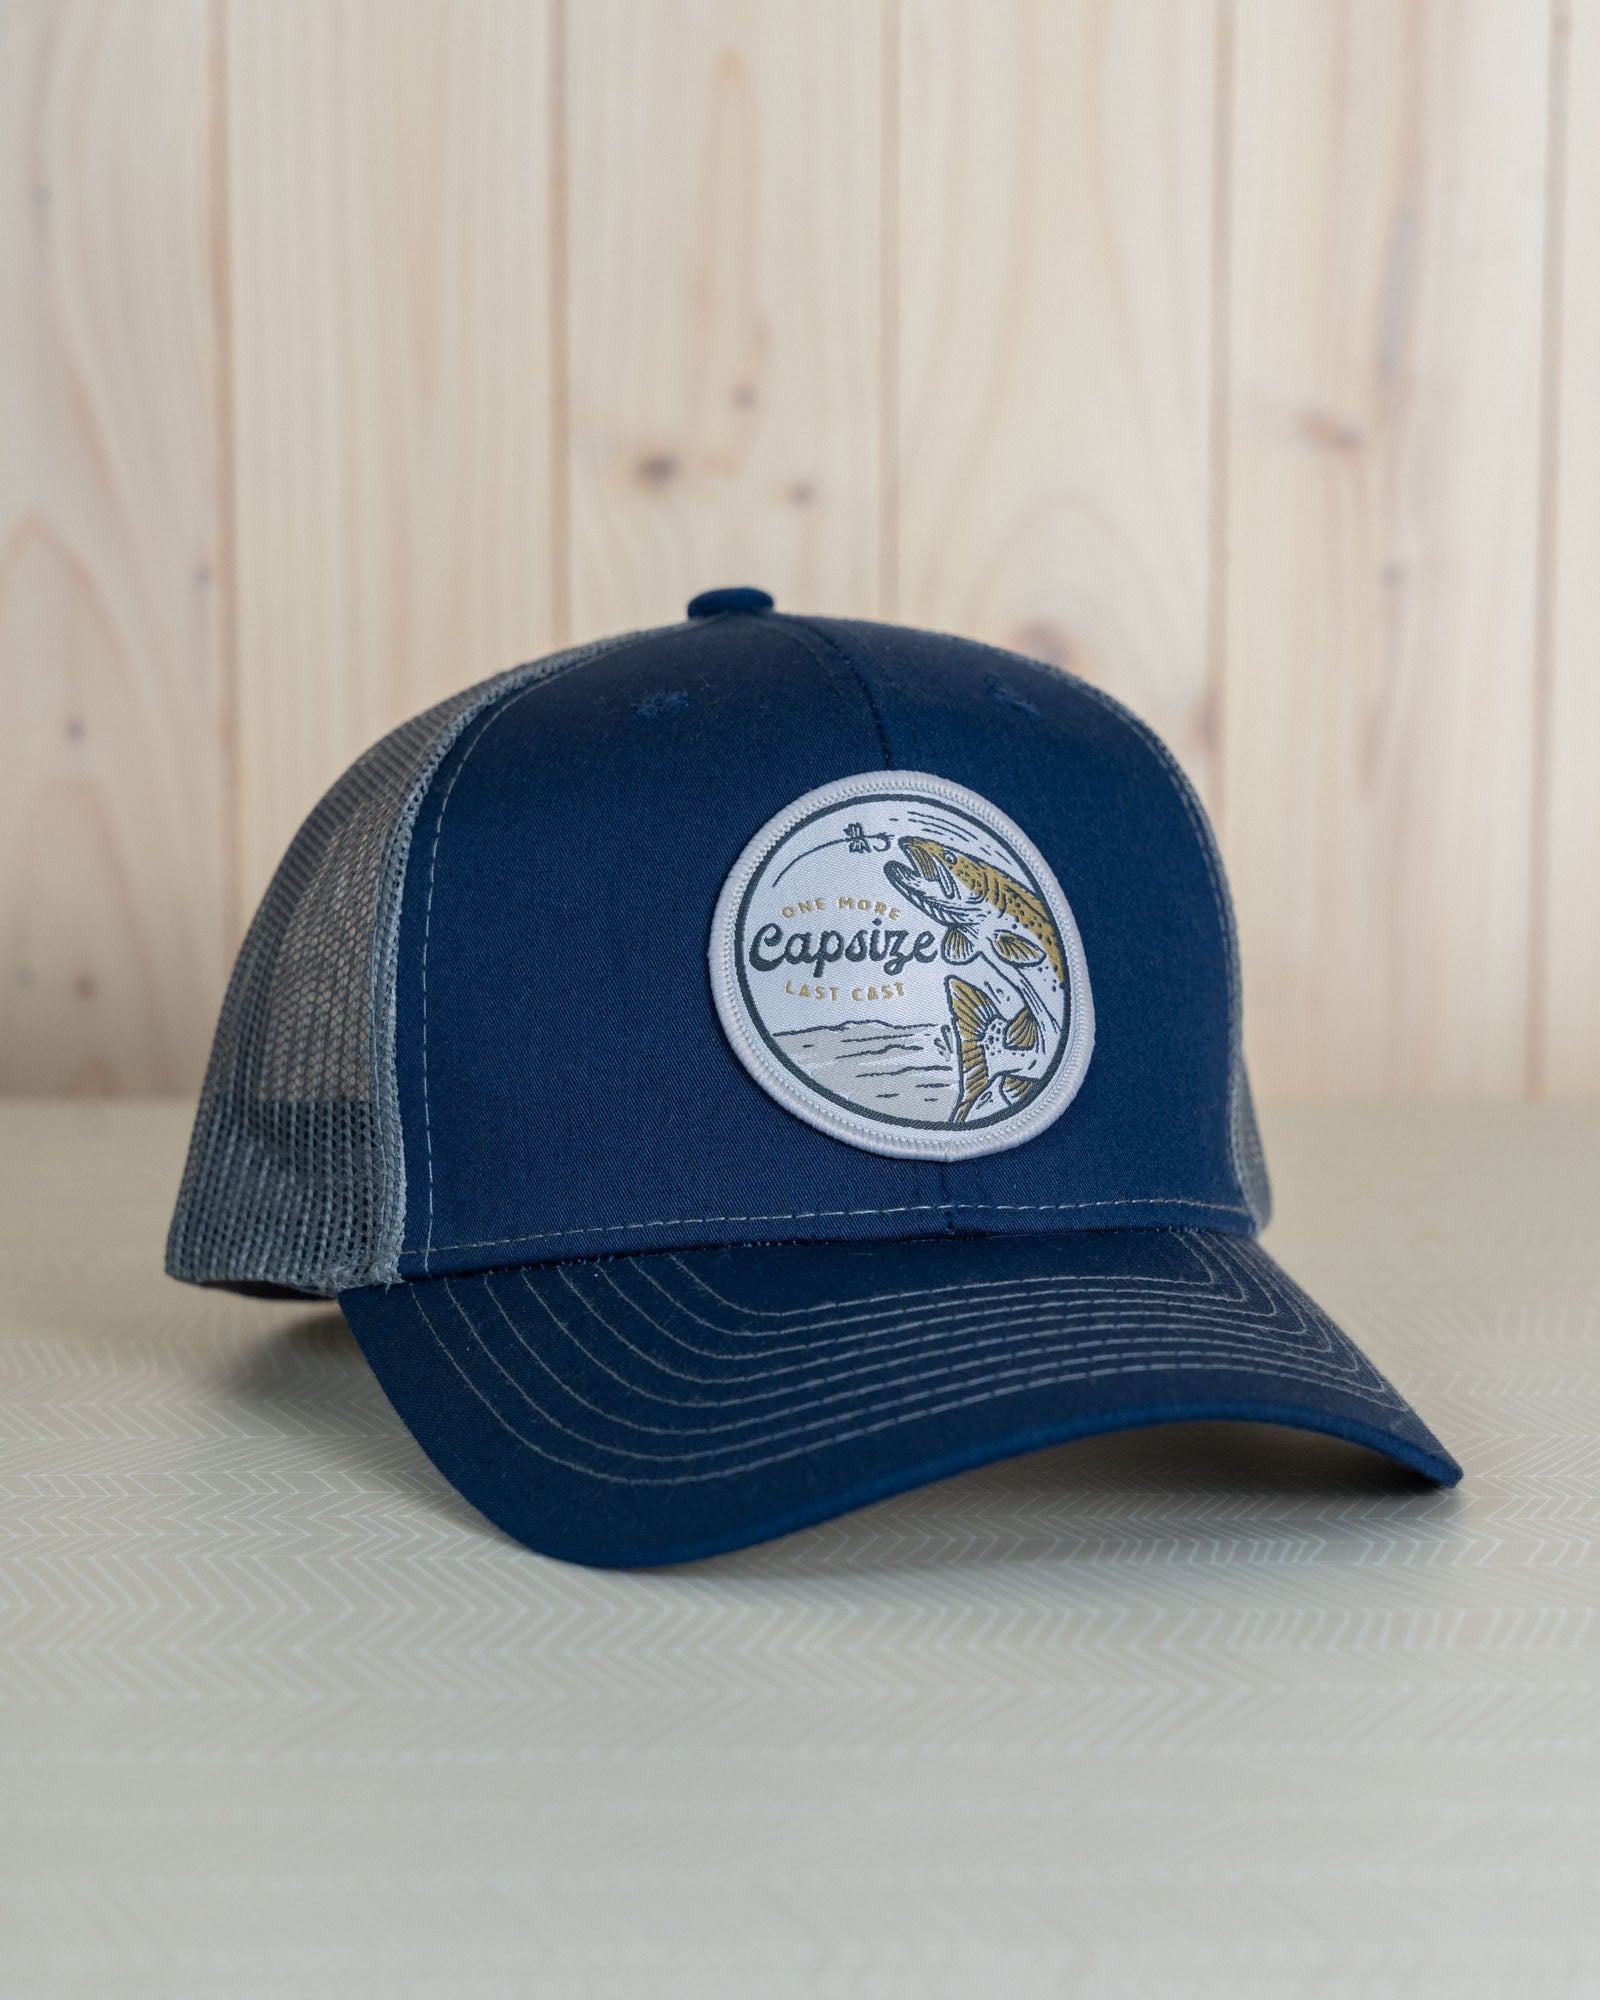 Limited Edition Hat | One More Last Cast Blue/Charcoal Trucker - Capsize Fly Fishing